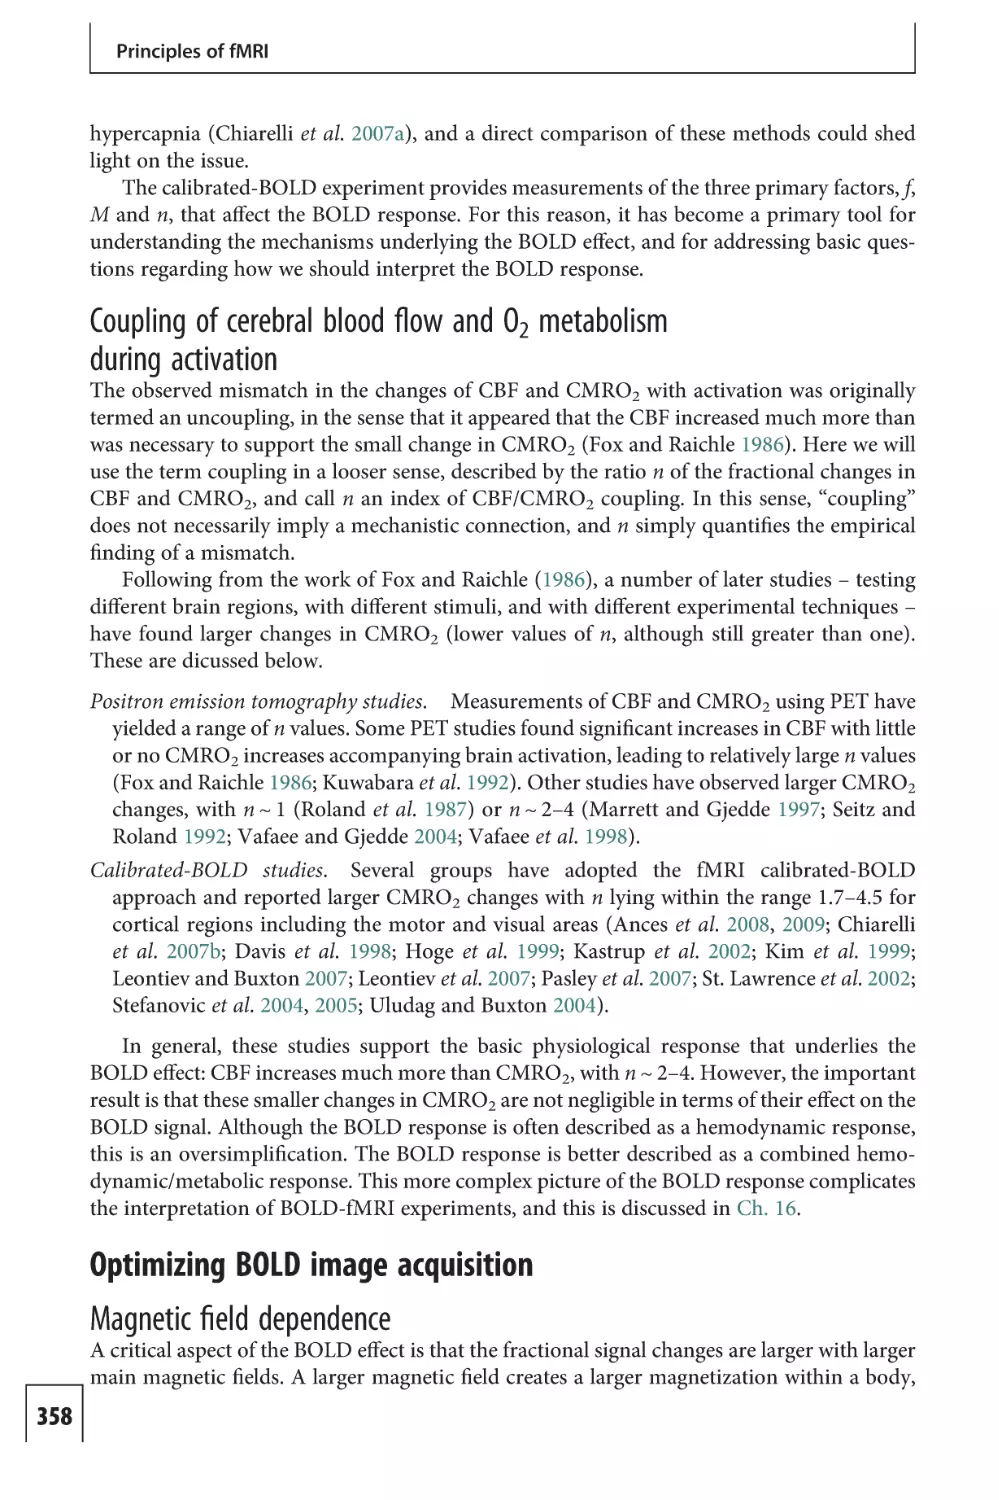 Coupling of cerebral blood flow and O2 metabolism during activation
Optimizing BOLD image acquisition
Magnetic field dependence